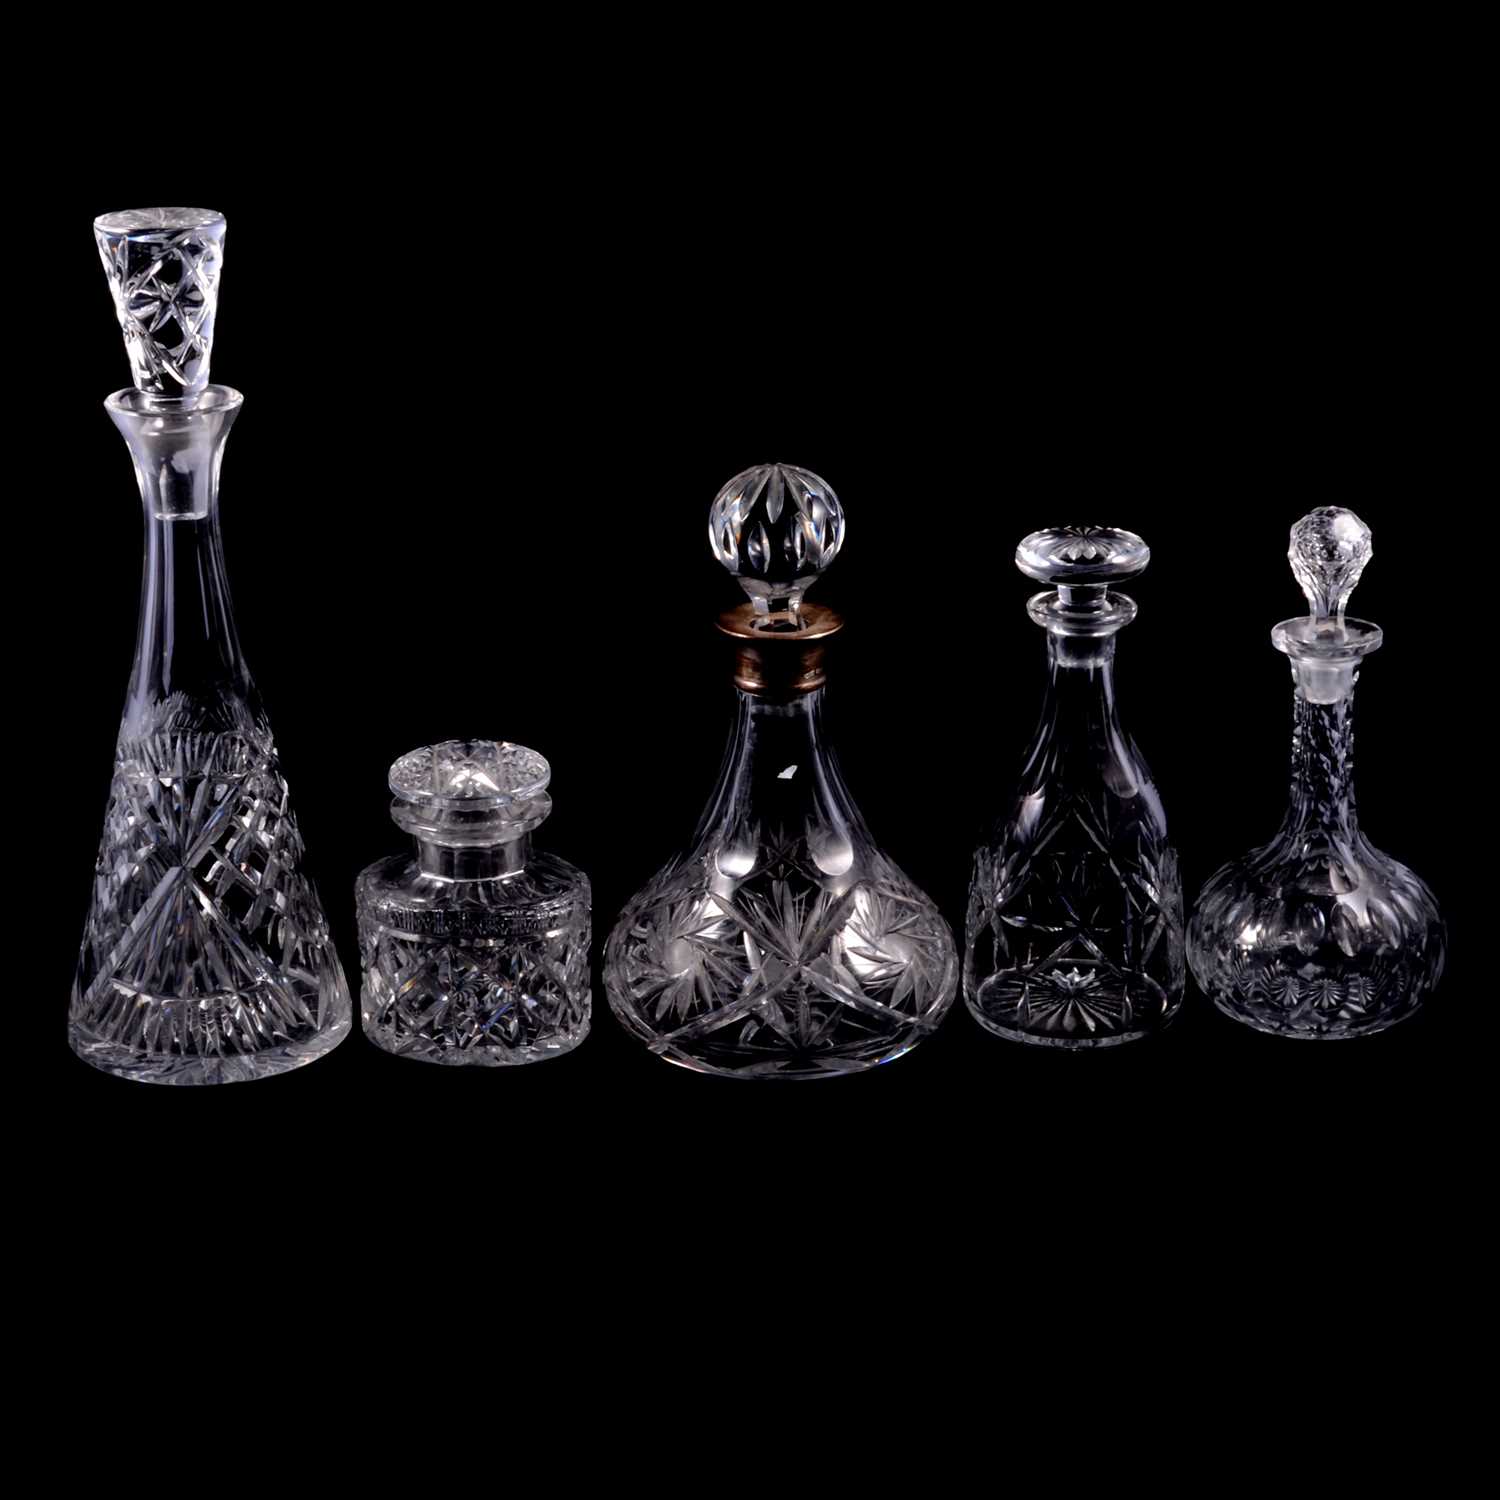 Silver-mounted cut glass decanter, and other decanters